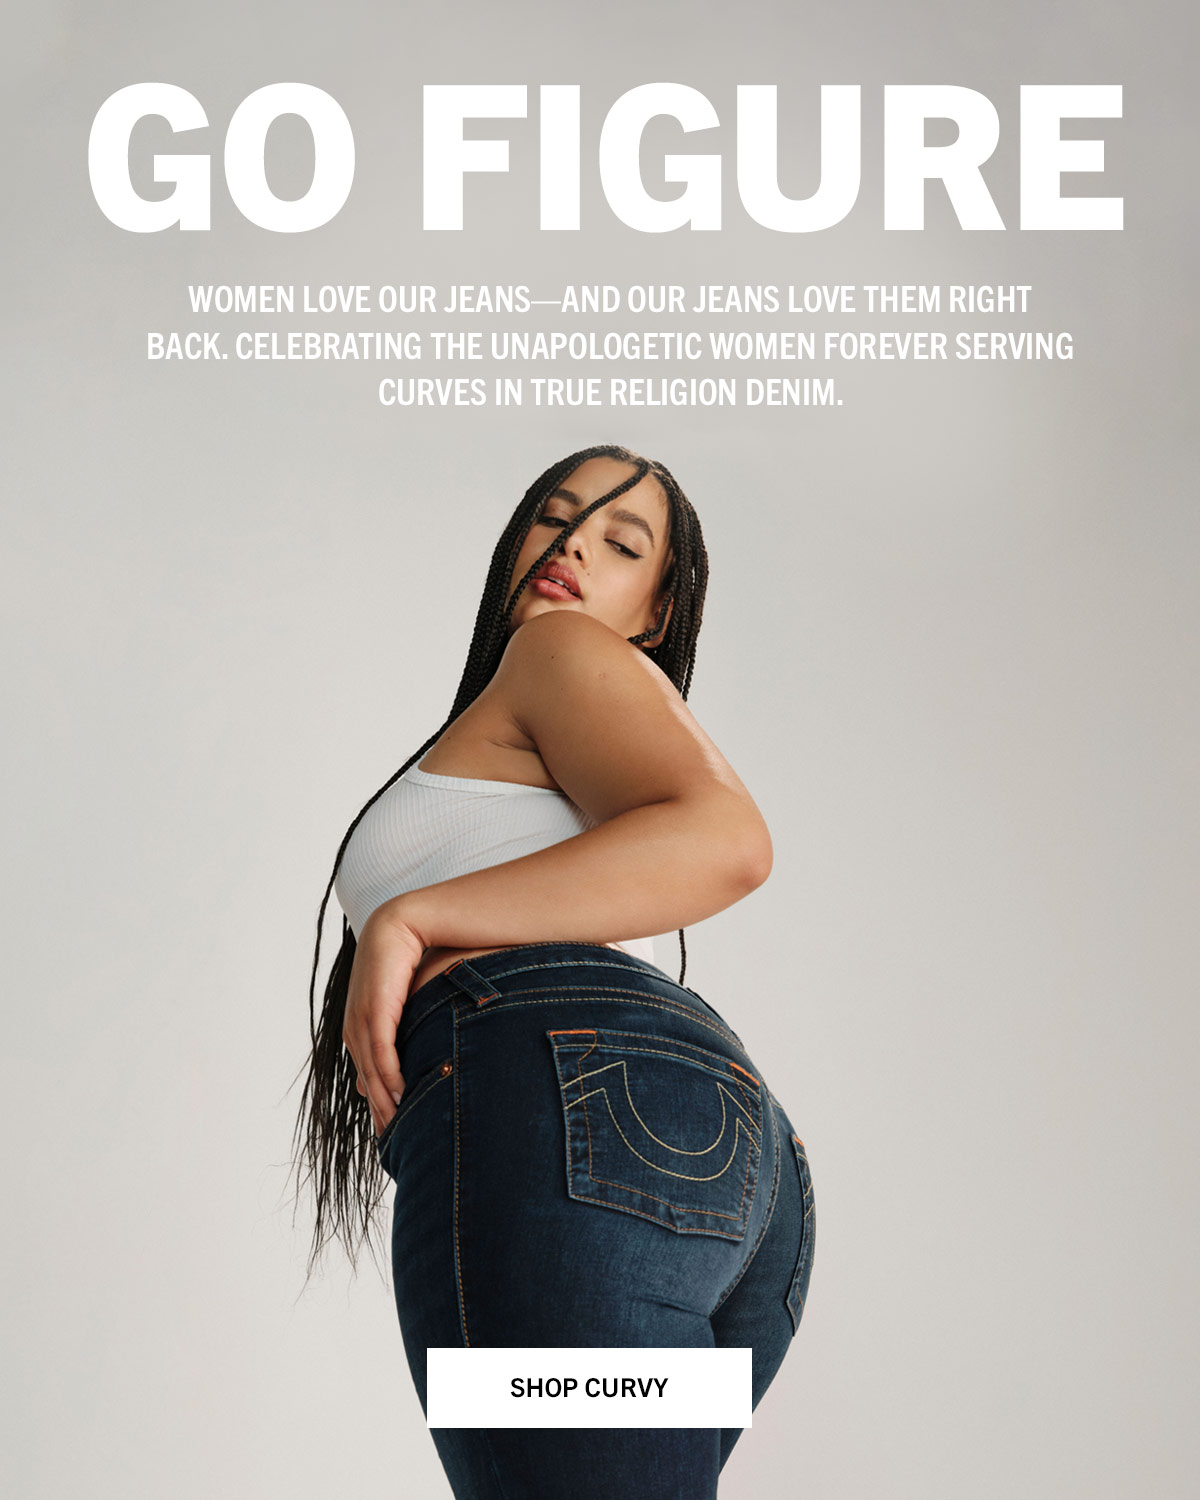 Women love our jeans—and our jeans love them right back. Celebrating the unapologetic women forever serving curves in True Religion denim. Go Figure. Shop Curvy.